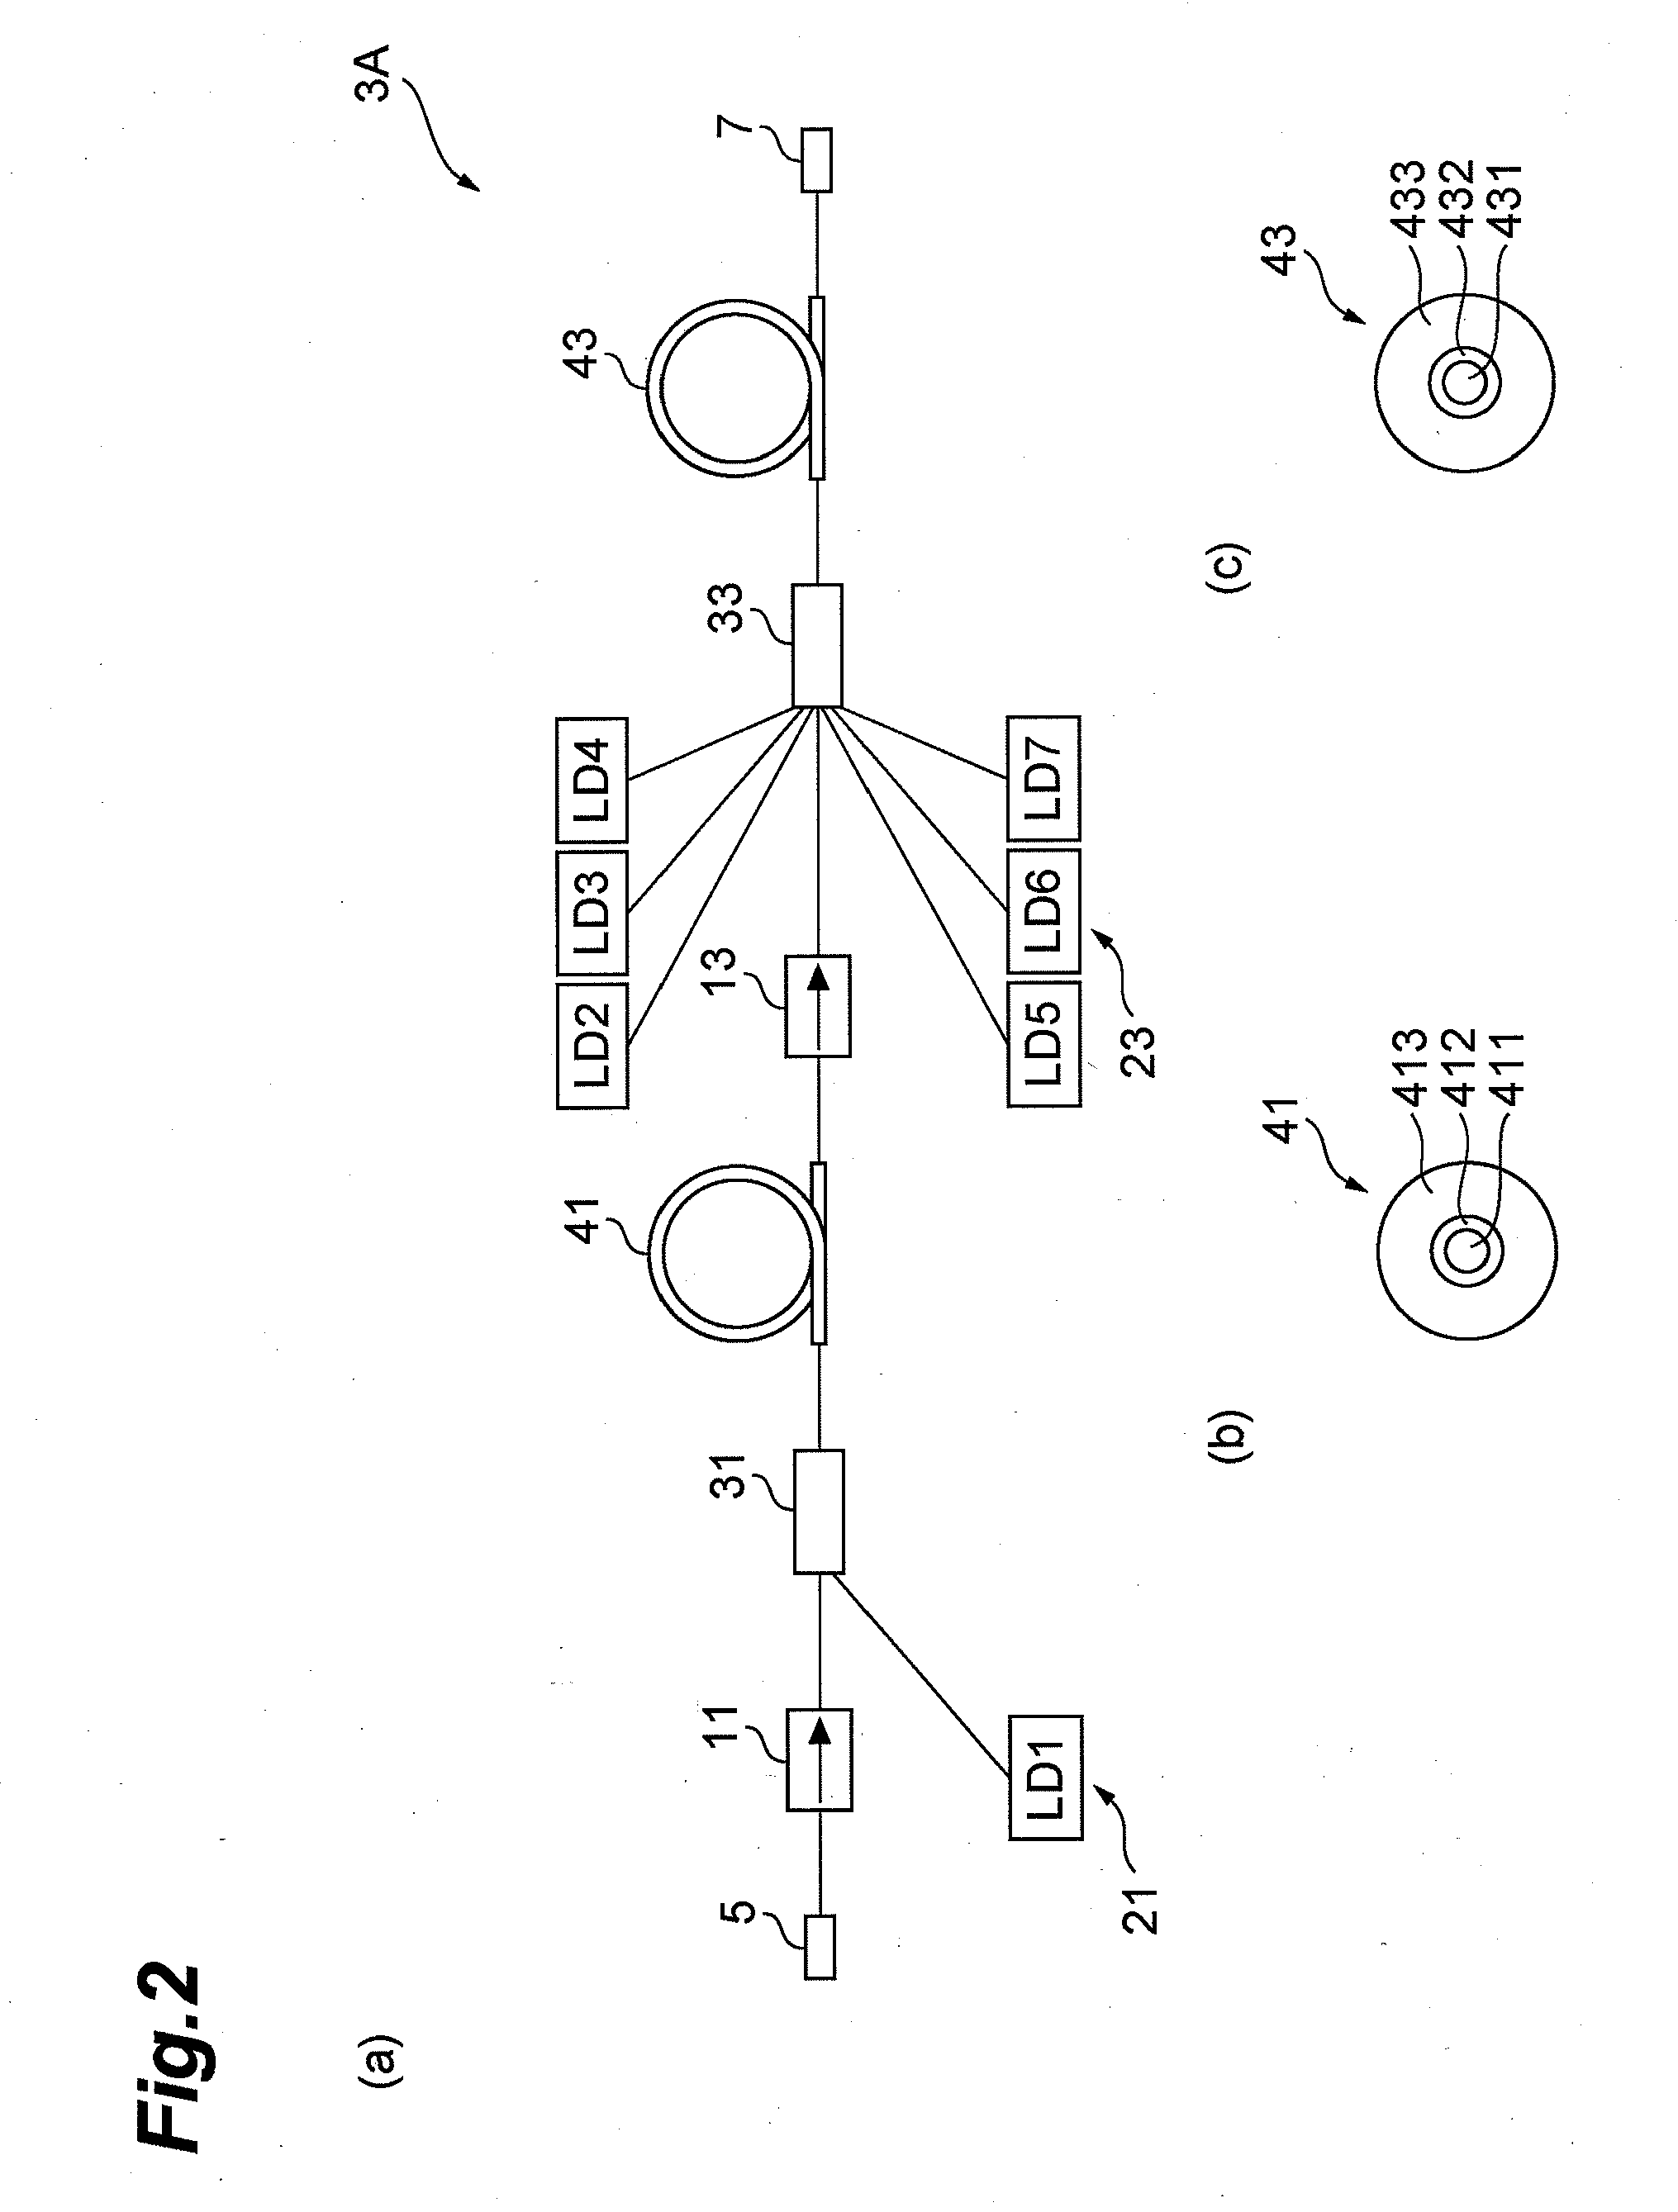 Optical amplification module and laser light source apparatus